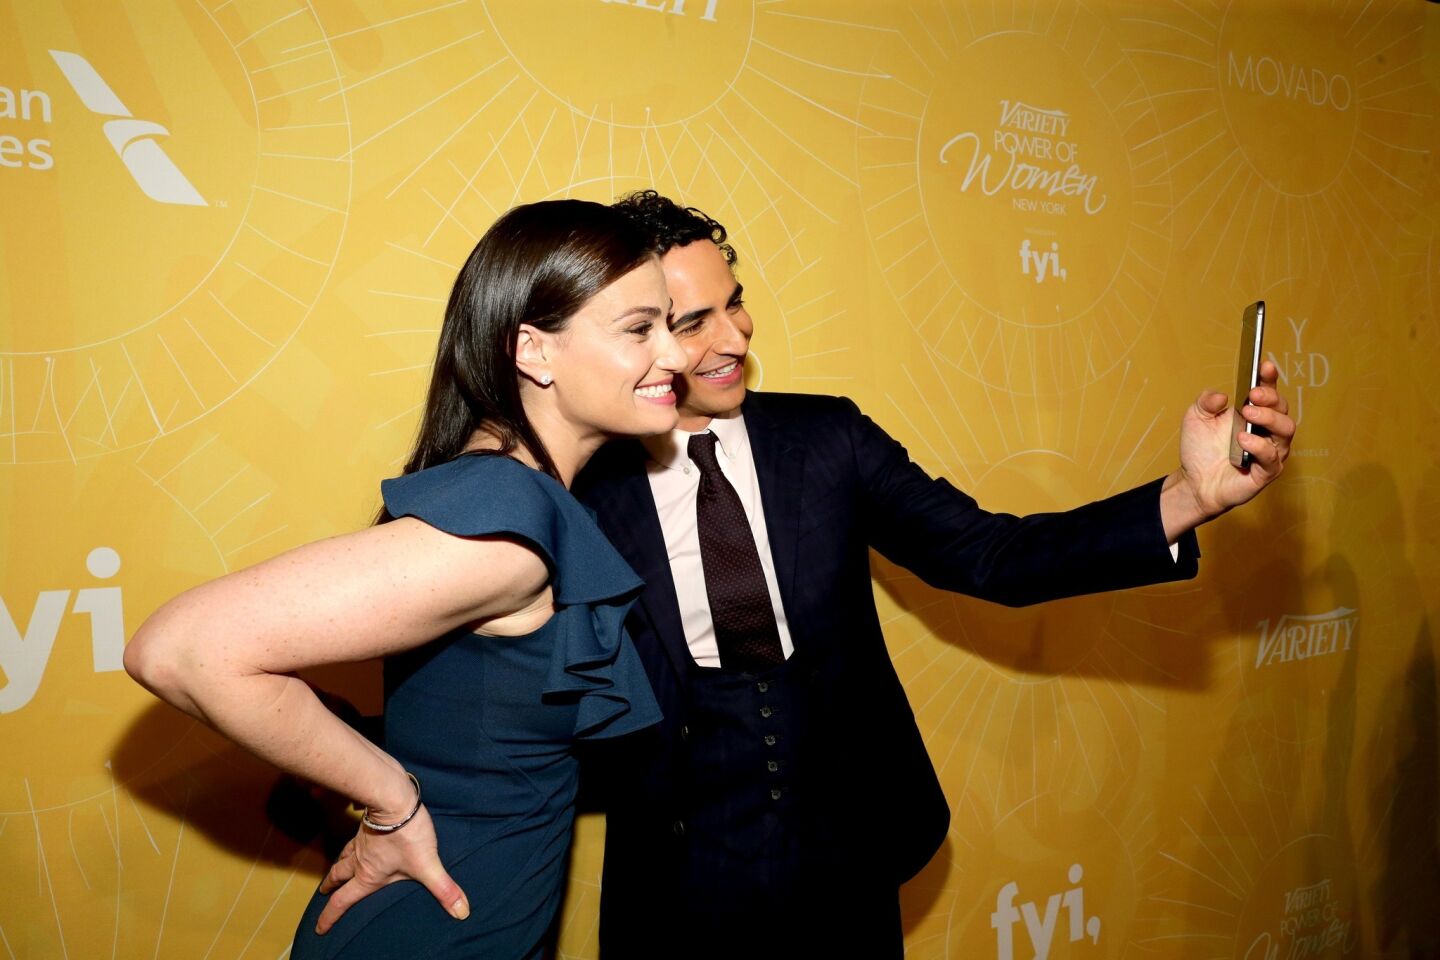 Idina Menzel and Zac Posen attend Variety Power Of Women: New York presented by FYI at Cipriani 42nd Street on April 25, 2014.